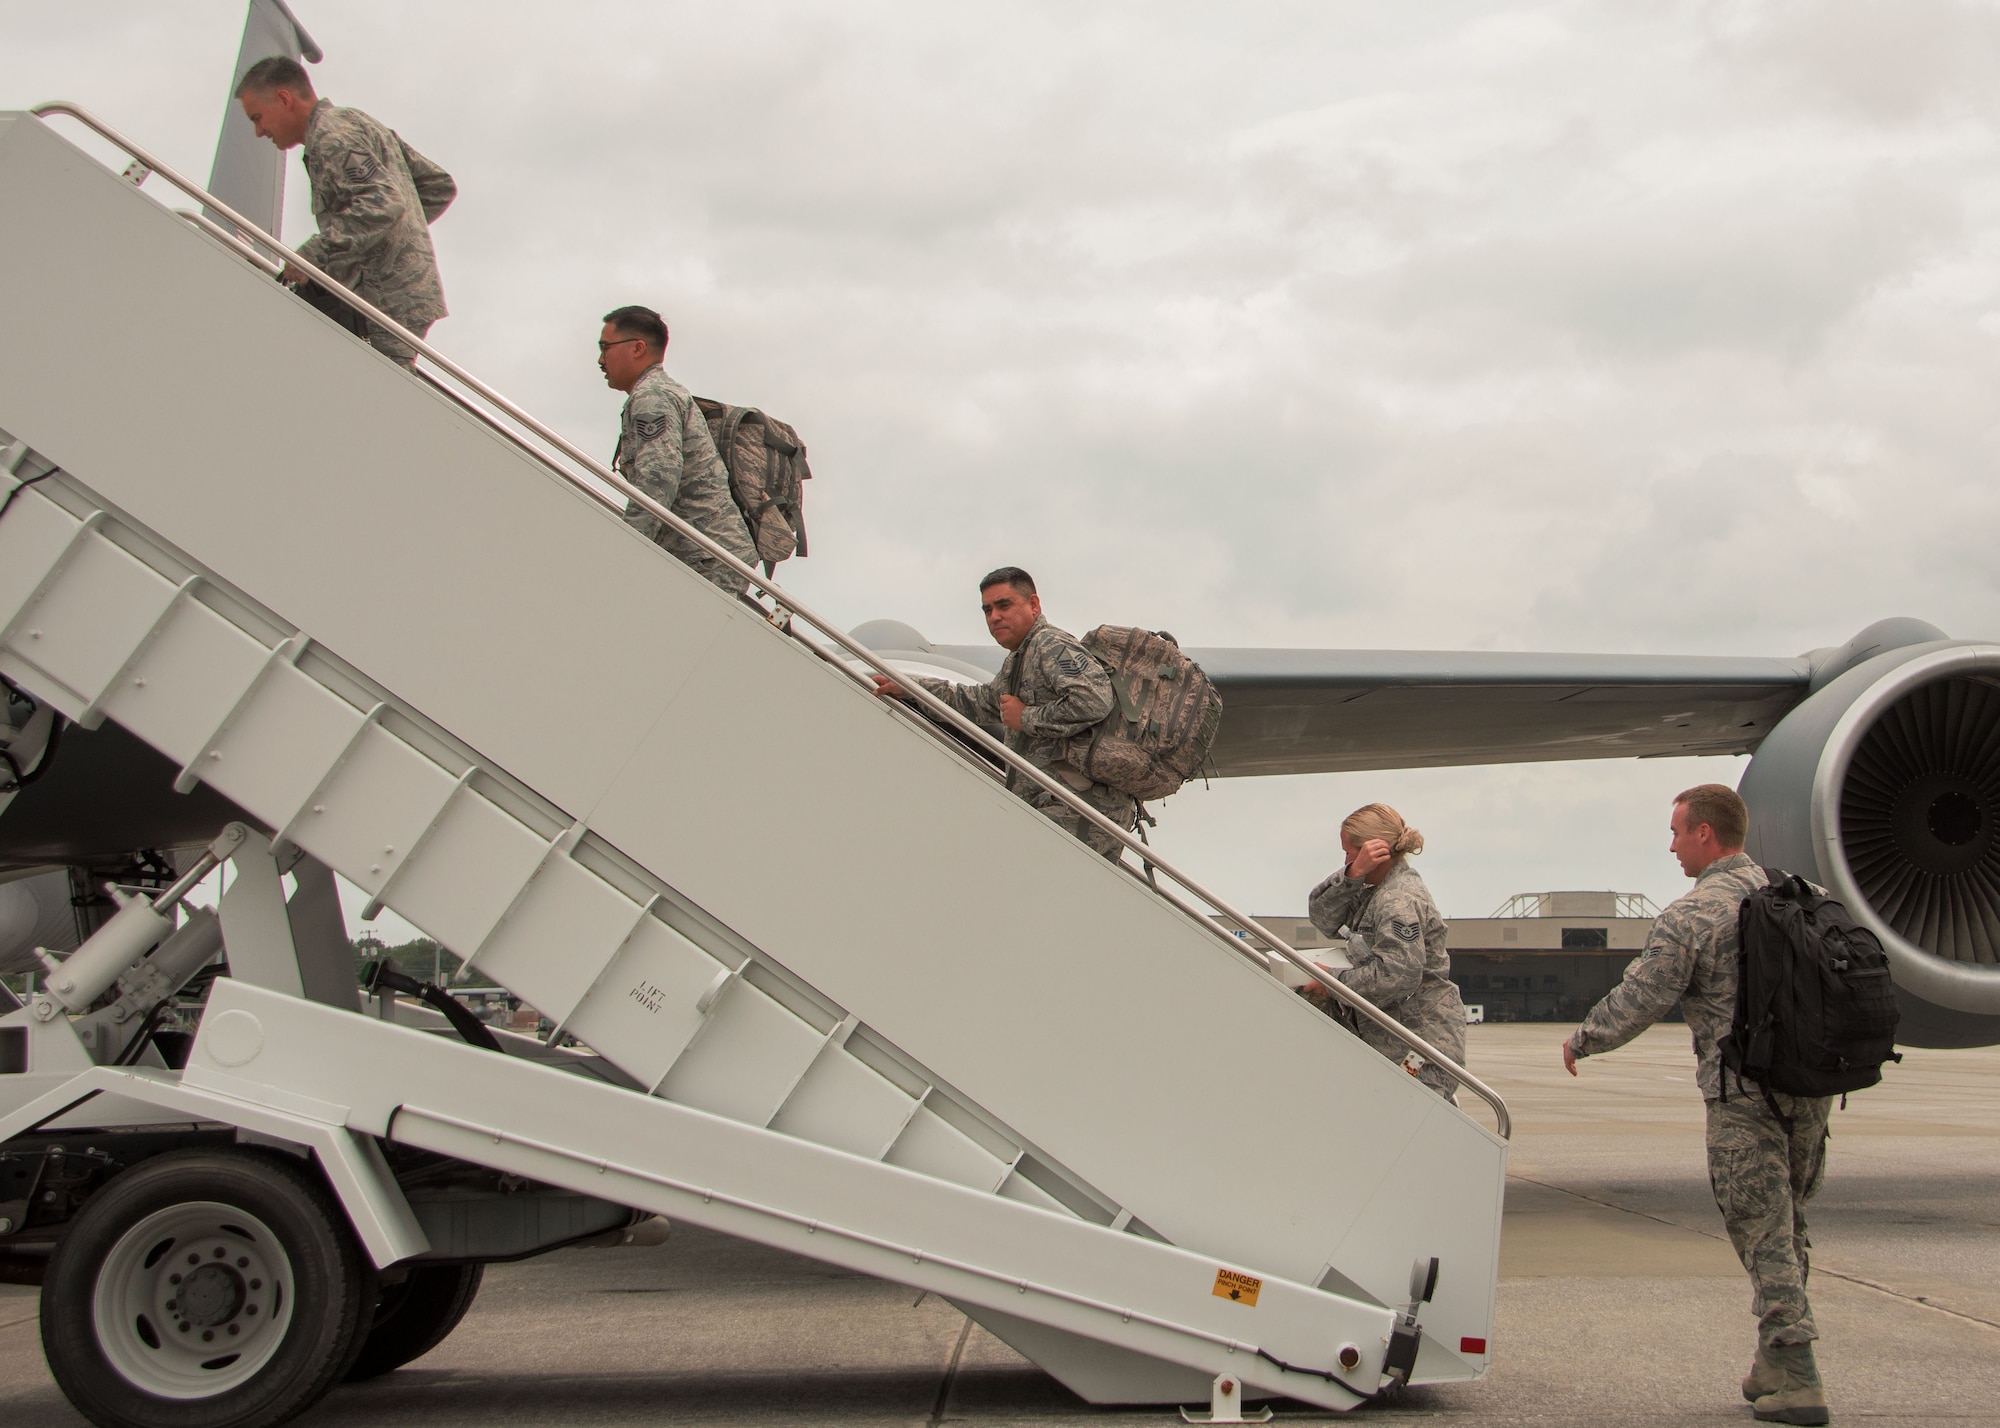 Airmen participating in the Patriot Warrior Exercise board a KC-135 Stratotanker at Dobbins Air Reserve Base, Ga. Aug. 7, 2017. The Airmen arrived at Dobbins from a variety of units around Air Force Reserve Command before receiving orders to deploy to the exercise frontlines. (U.S. Air Force photo/Staff Sgt. Andrew Park)